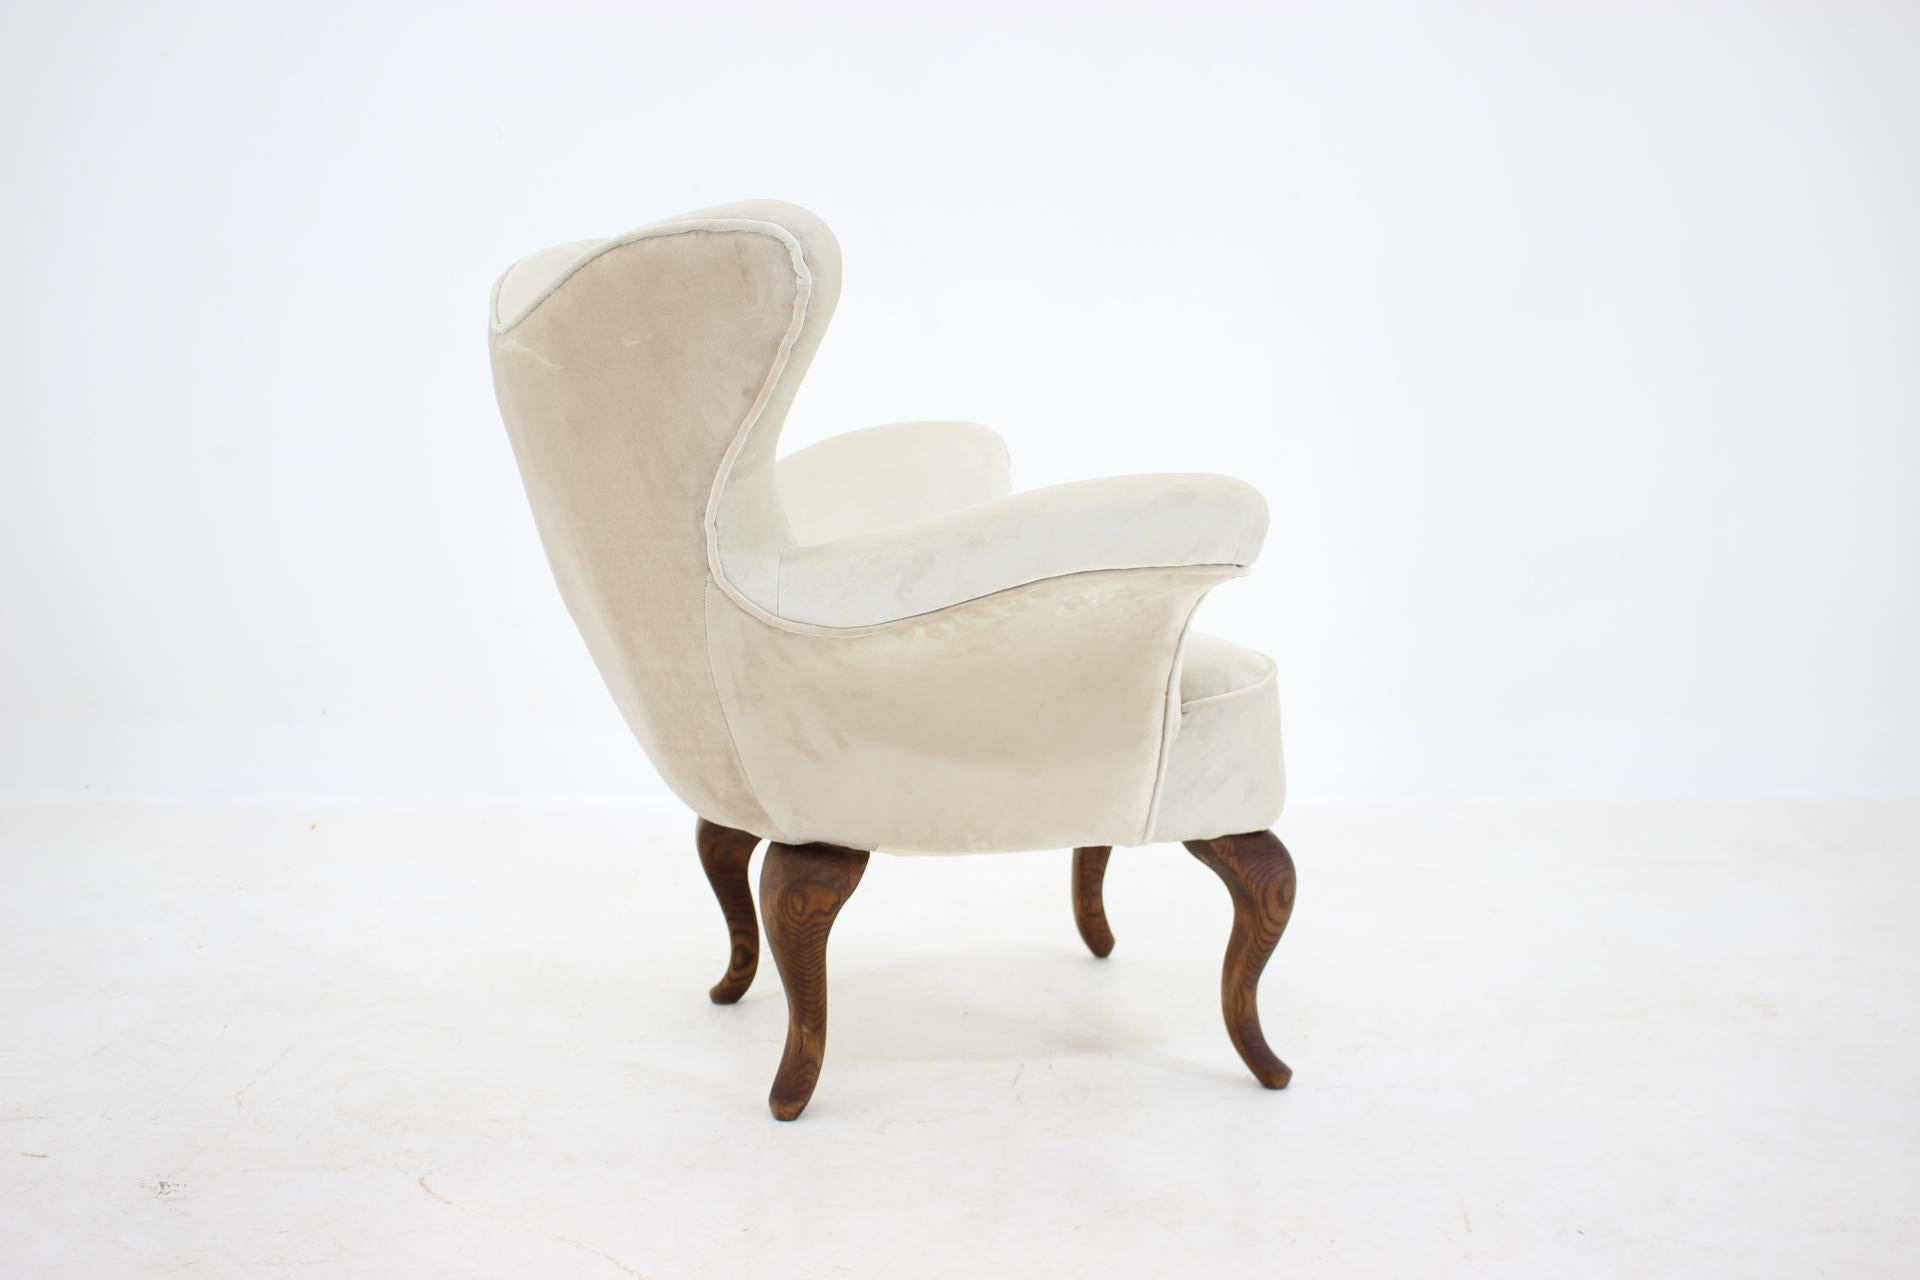 - Newly upholstered in velvet fabric
- Wooden legs have been refurbished 
- Height of seat 43 cm.
  